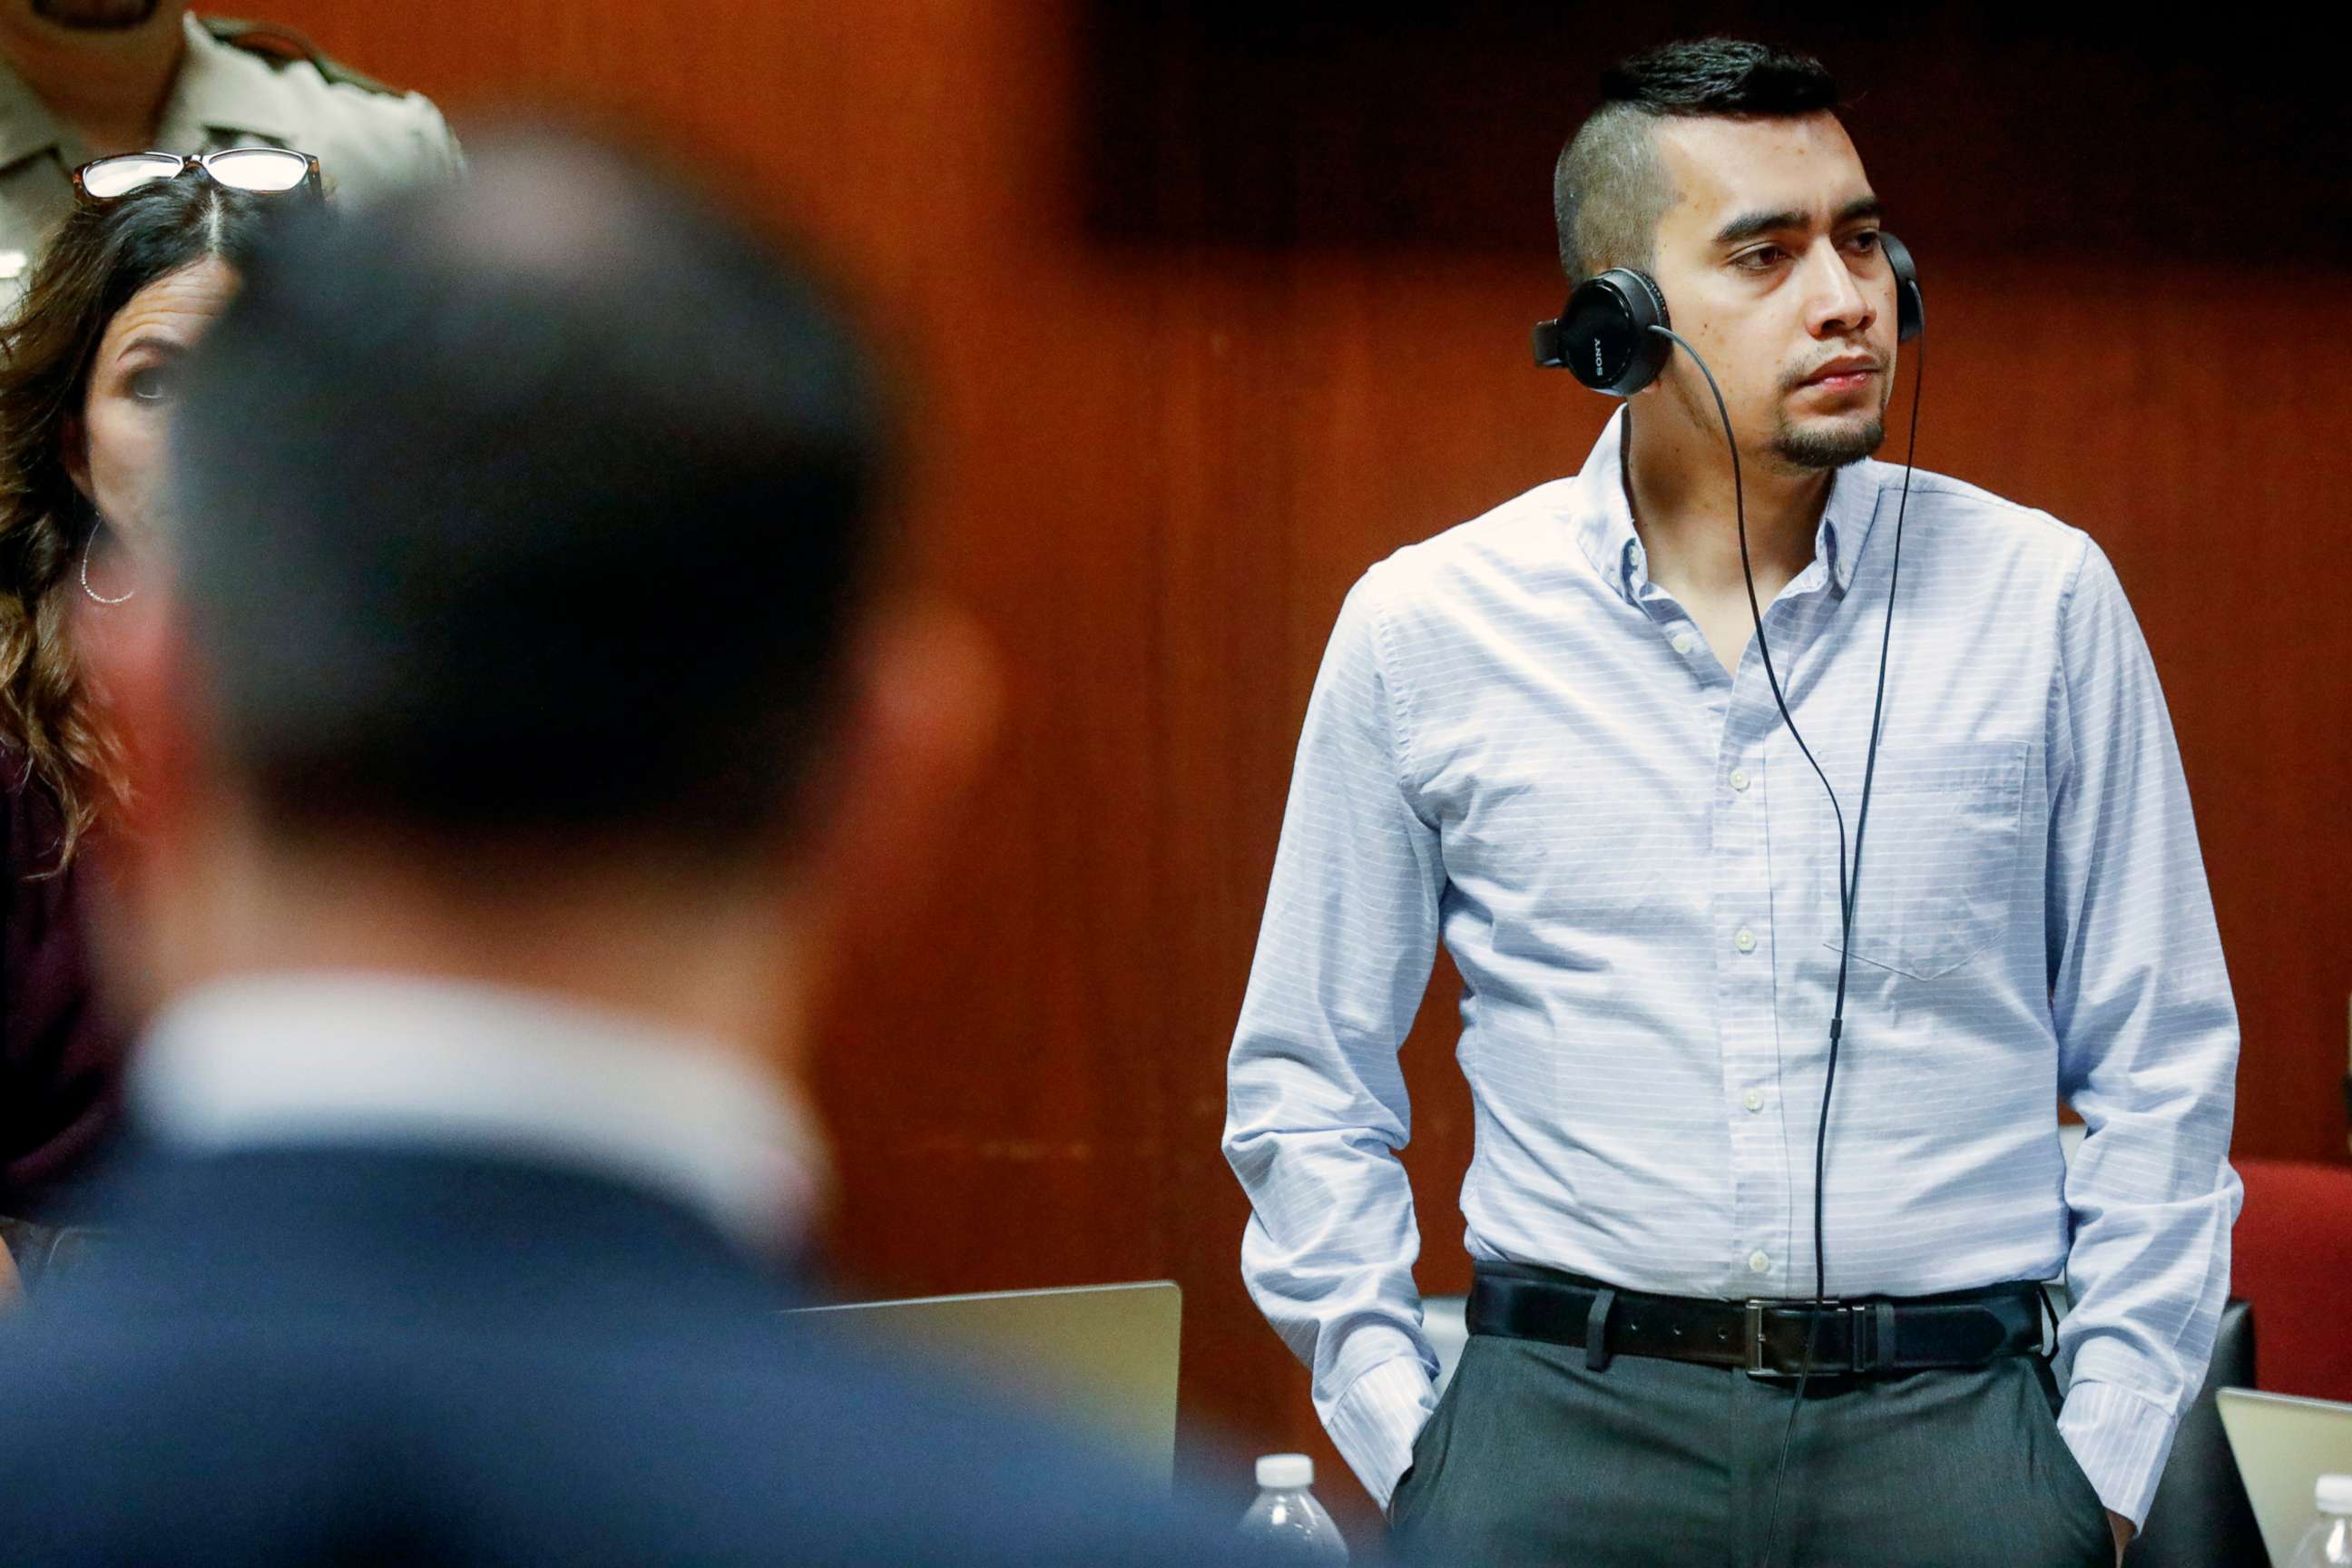 PHOTO: Cristhian Bahena Rivera stands as jurors enter the courtroom during the second day of testimony of his trial at the Scott County Courthouse in Davenport, Iowa, on May 20, 2021.